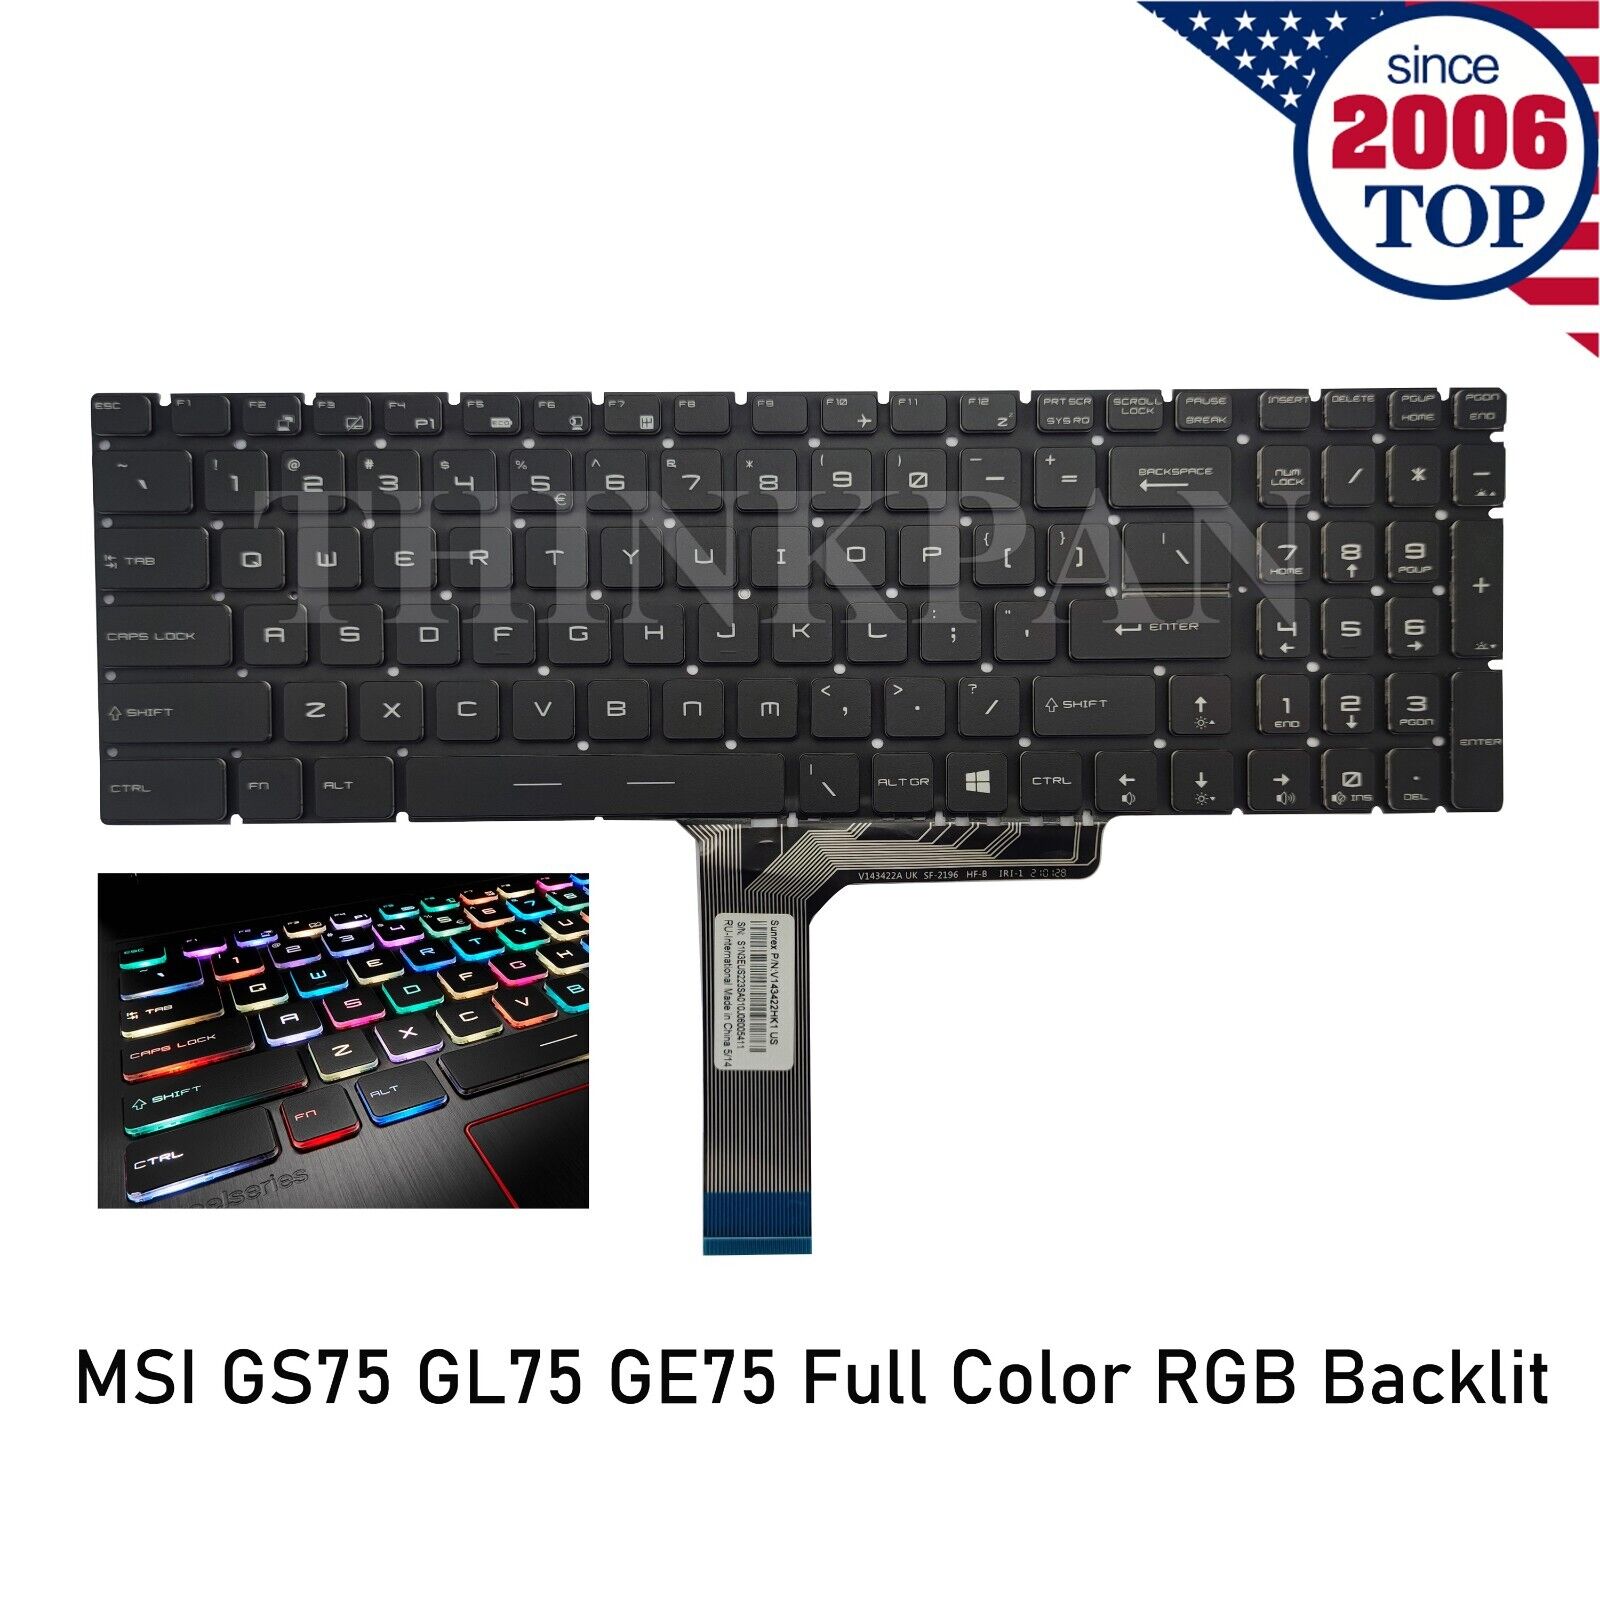 New RGB Full Color Backlit US Keyboard for MSI GS75 GL75 GE75